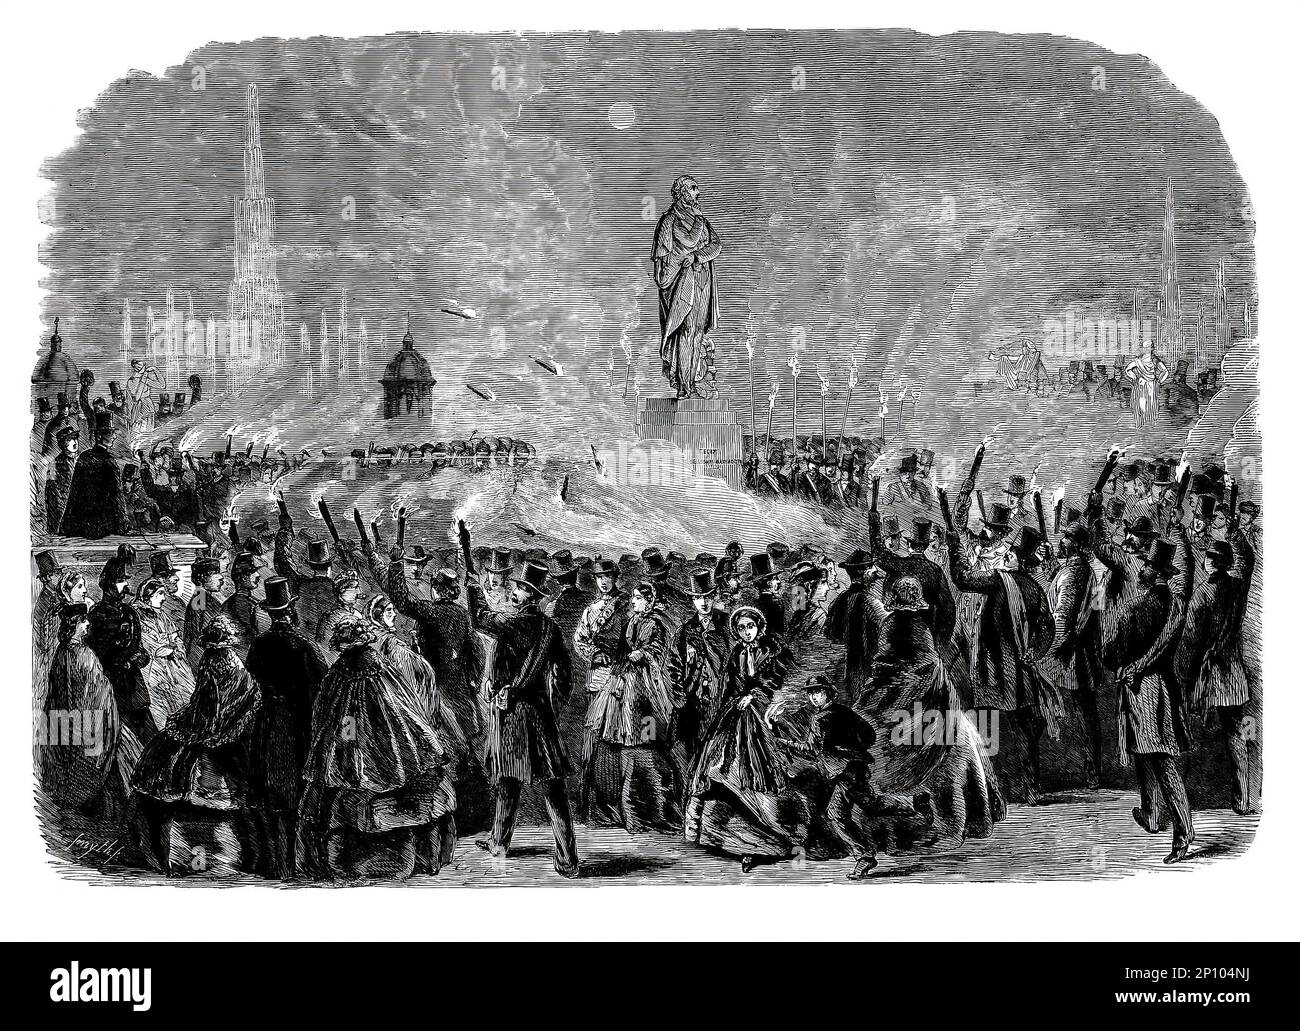 A torchlight procession during the 1860 Mendelssohn Festival at Crystal Palace, London, England following the unveiling of the composers statue by the sculptor John Bacon. Stock Photo